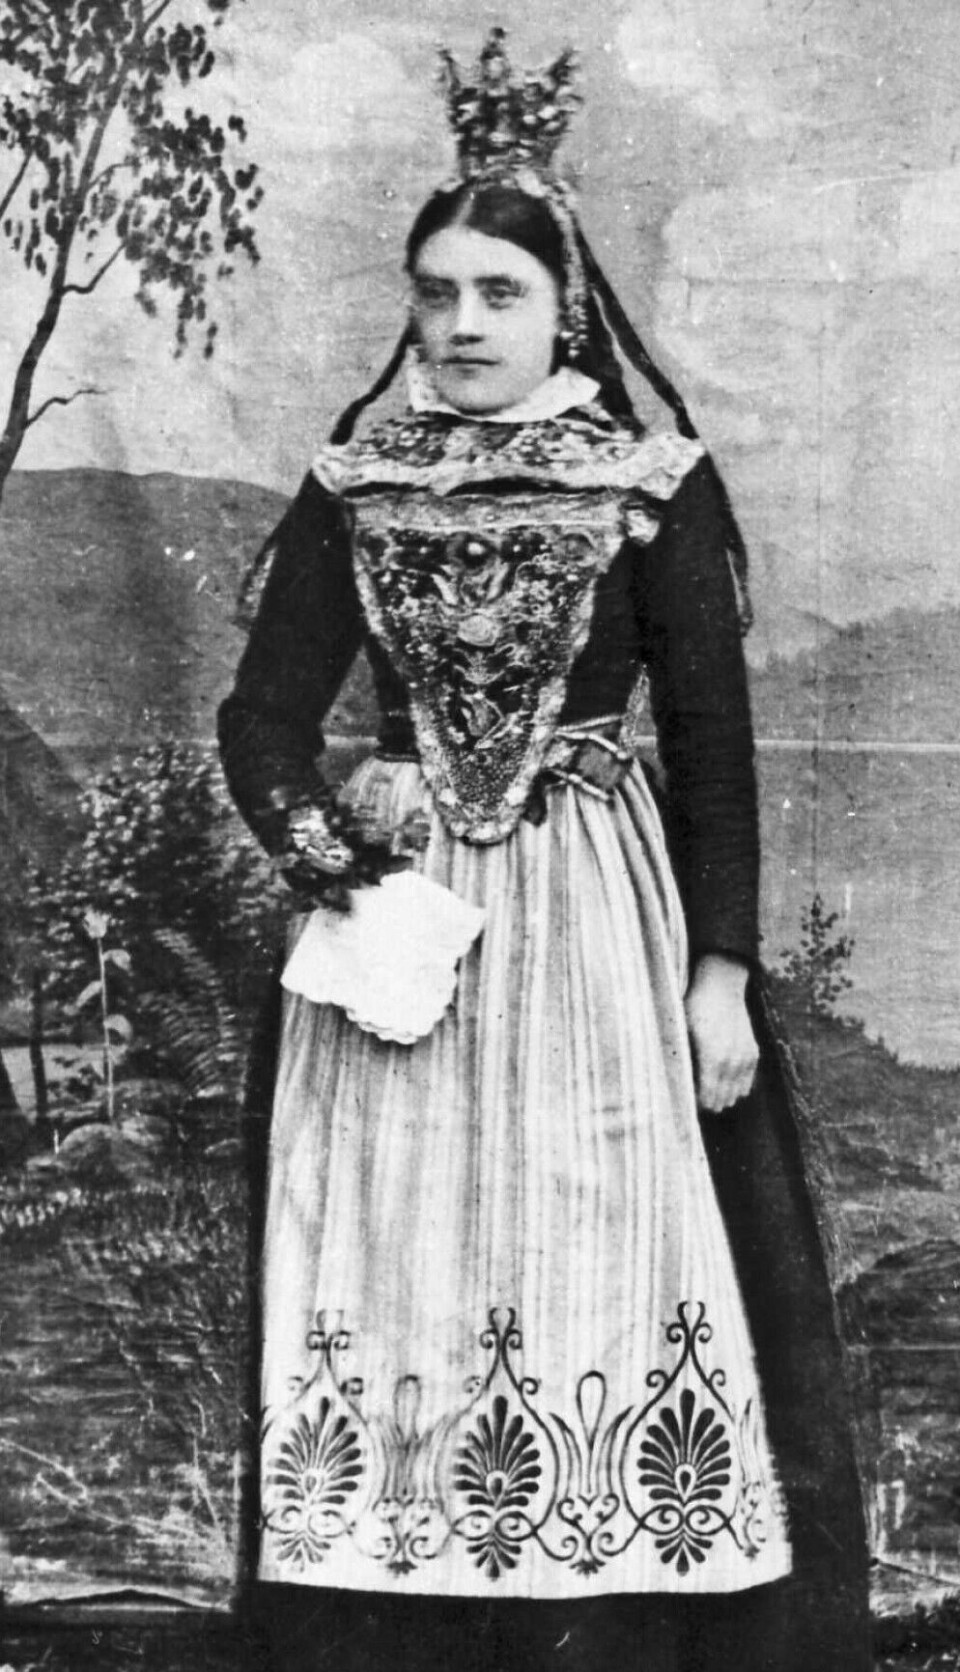 Girl from Dalsbygda adorned as a bride according to local traditions in 1868.